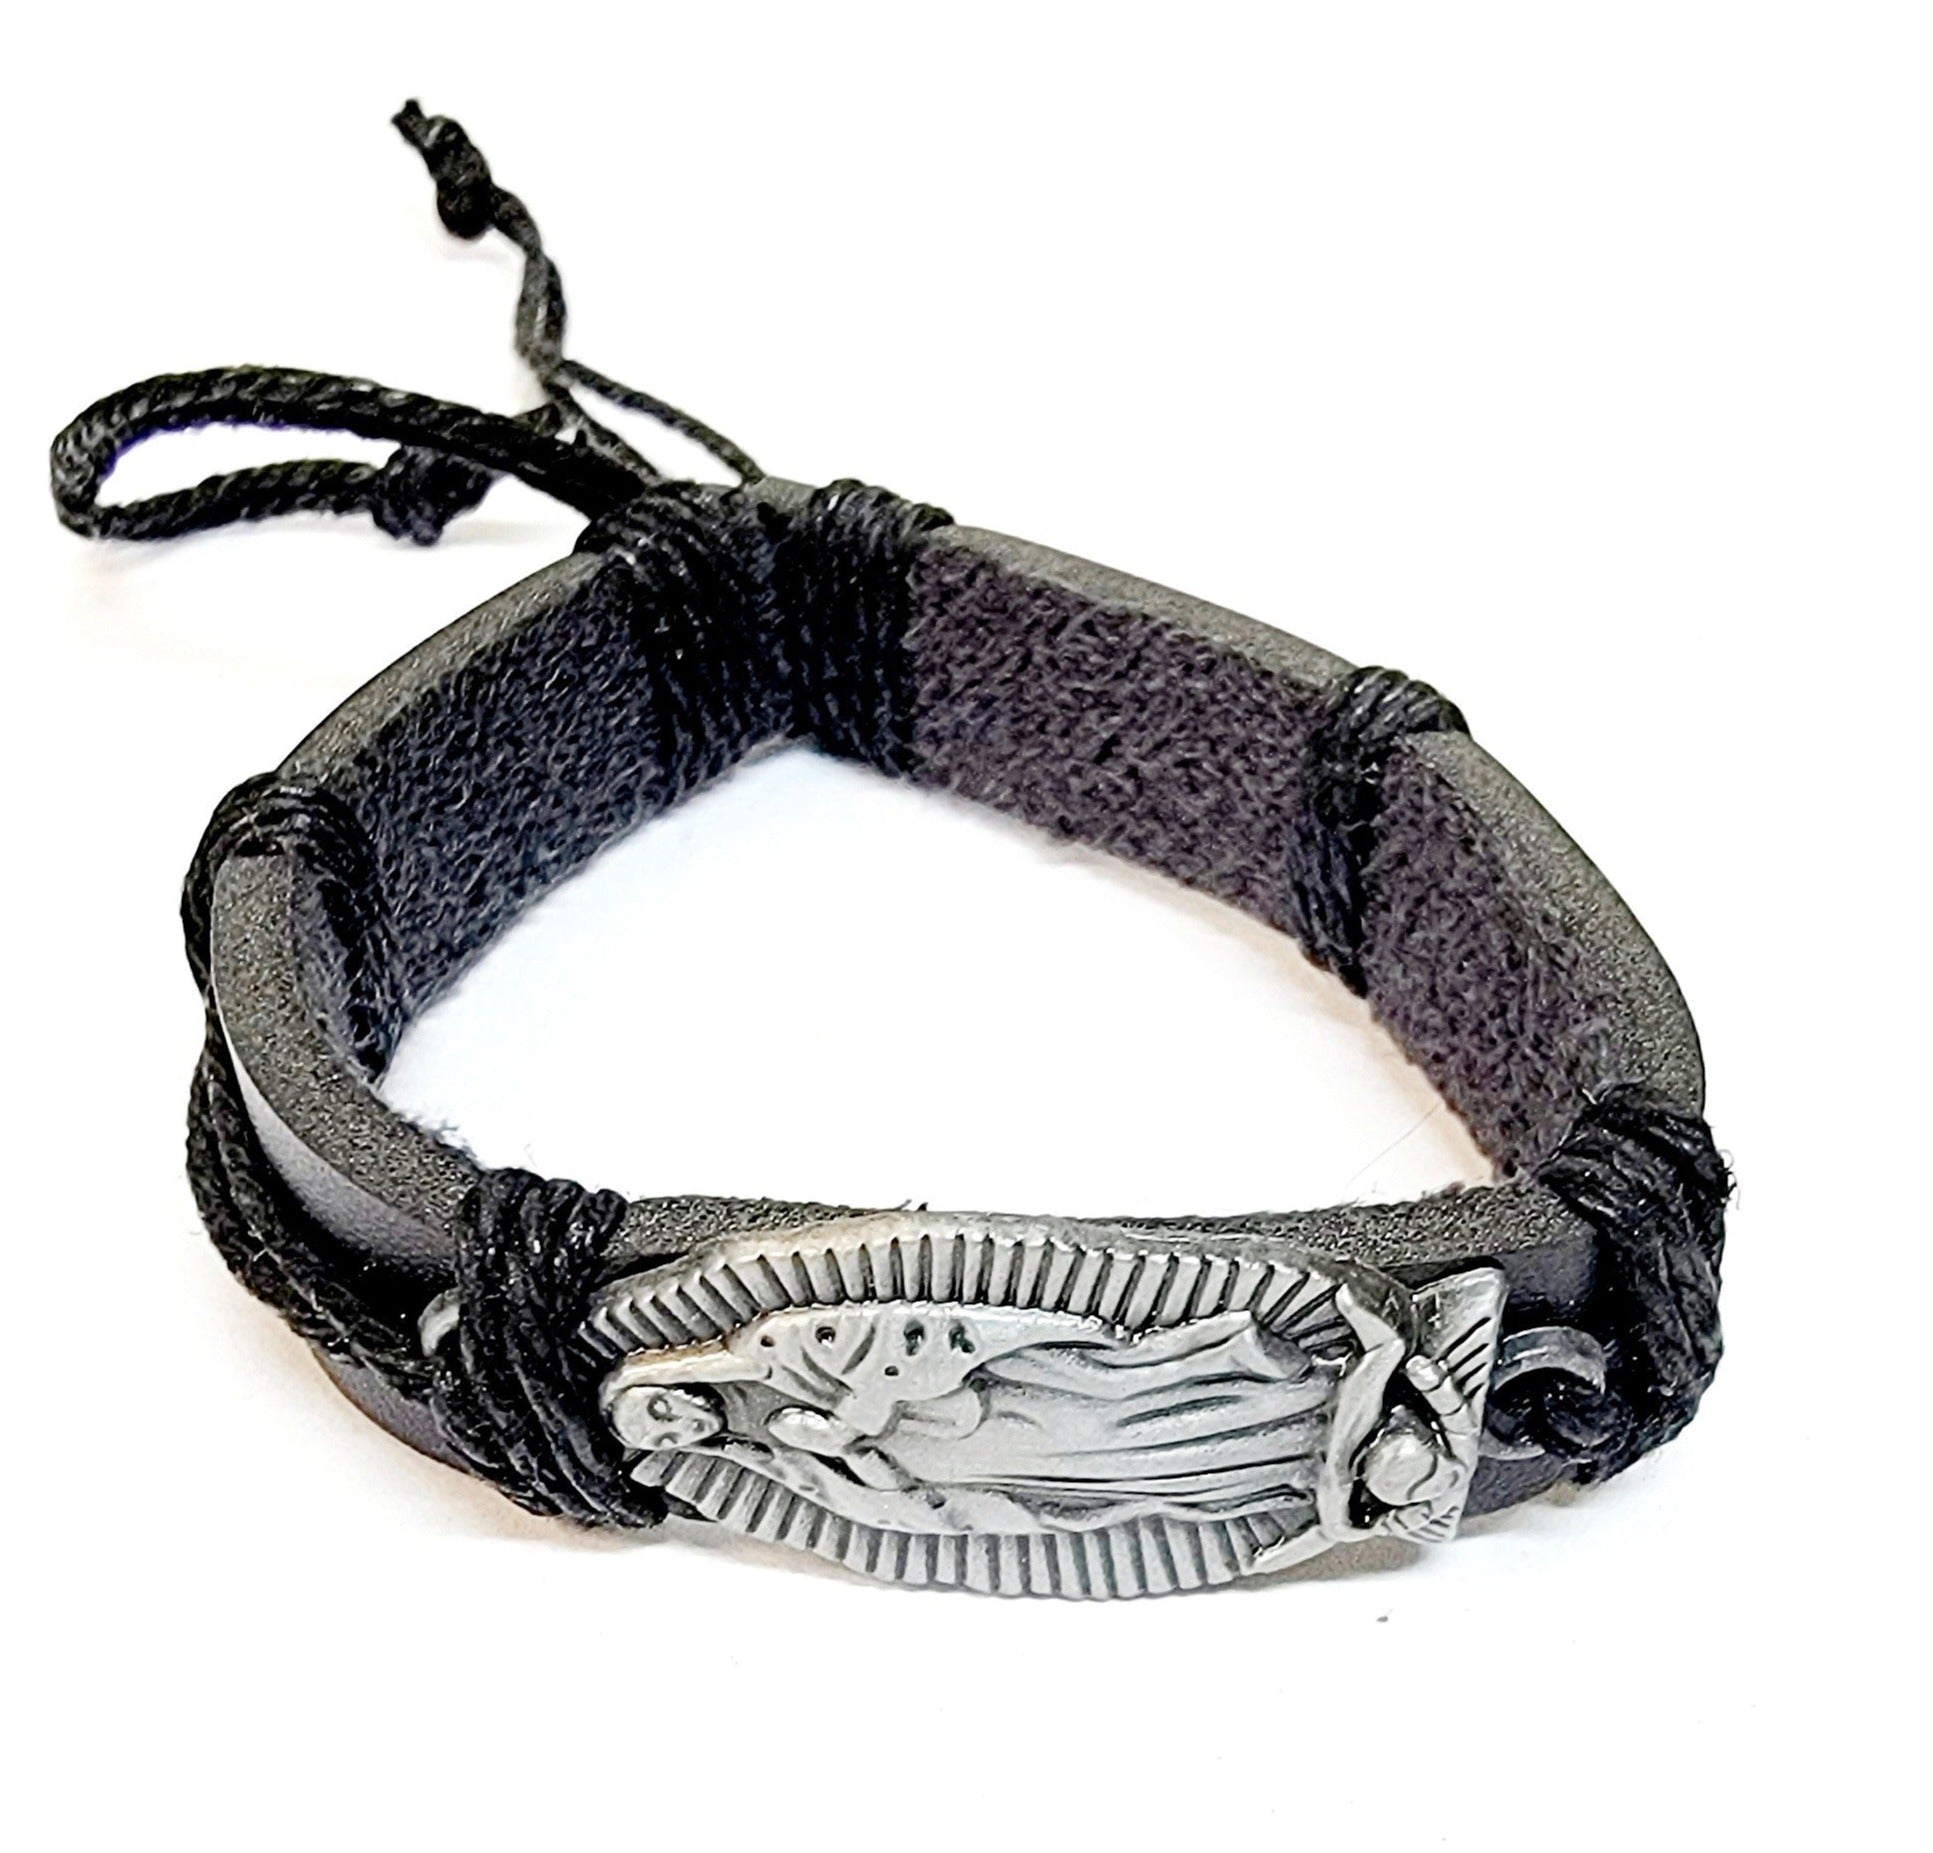 Our Lady of Guadalupe Leather Bracelet (MORE COLORS)